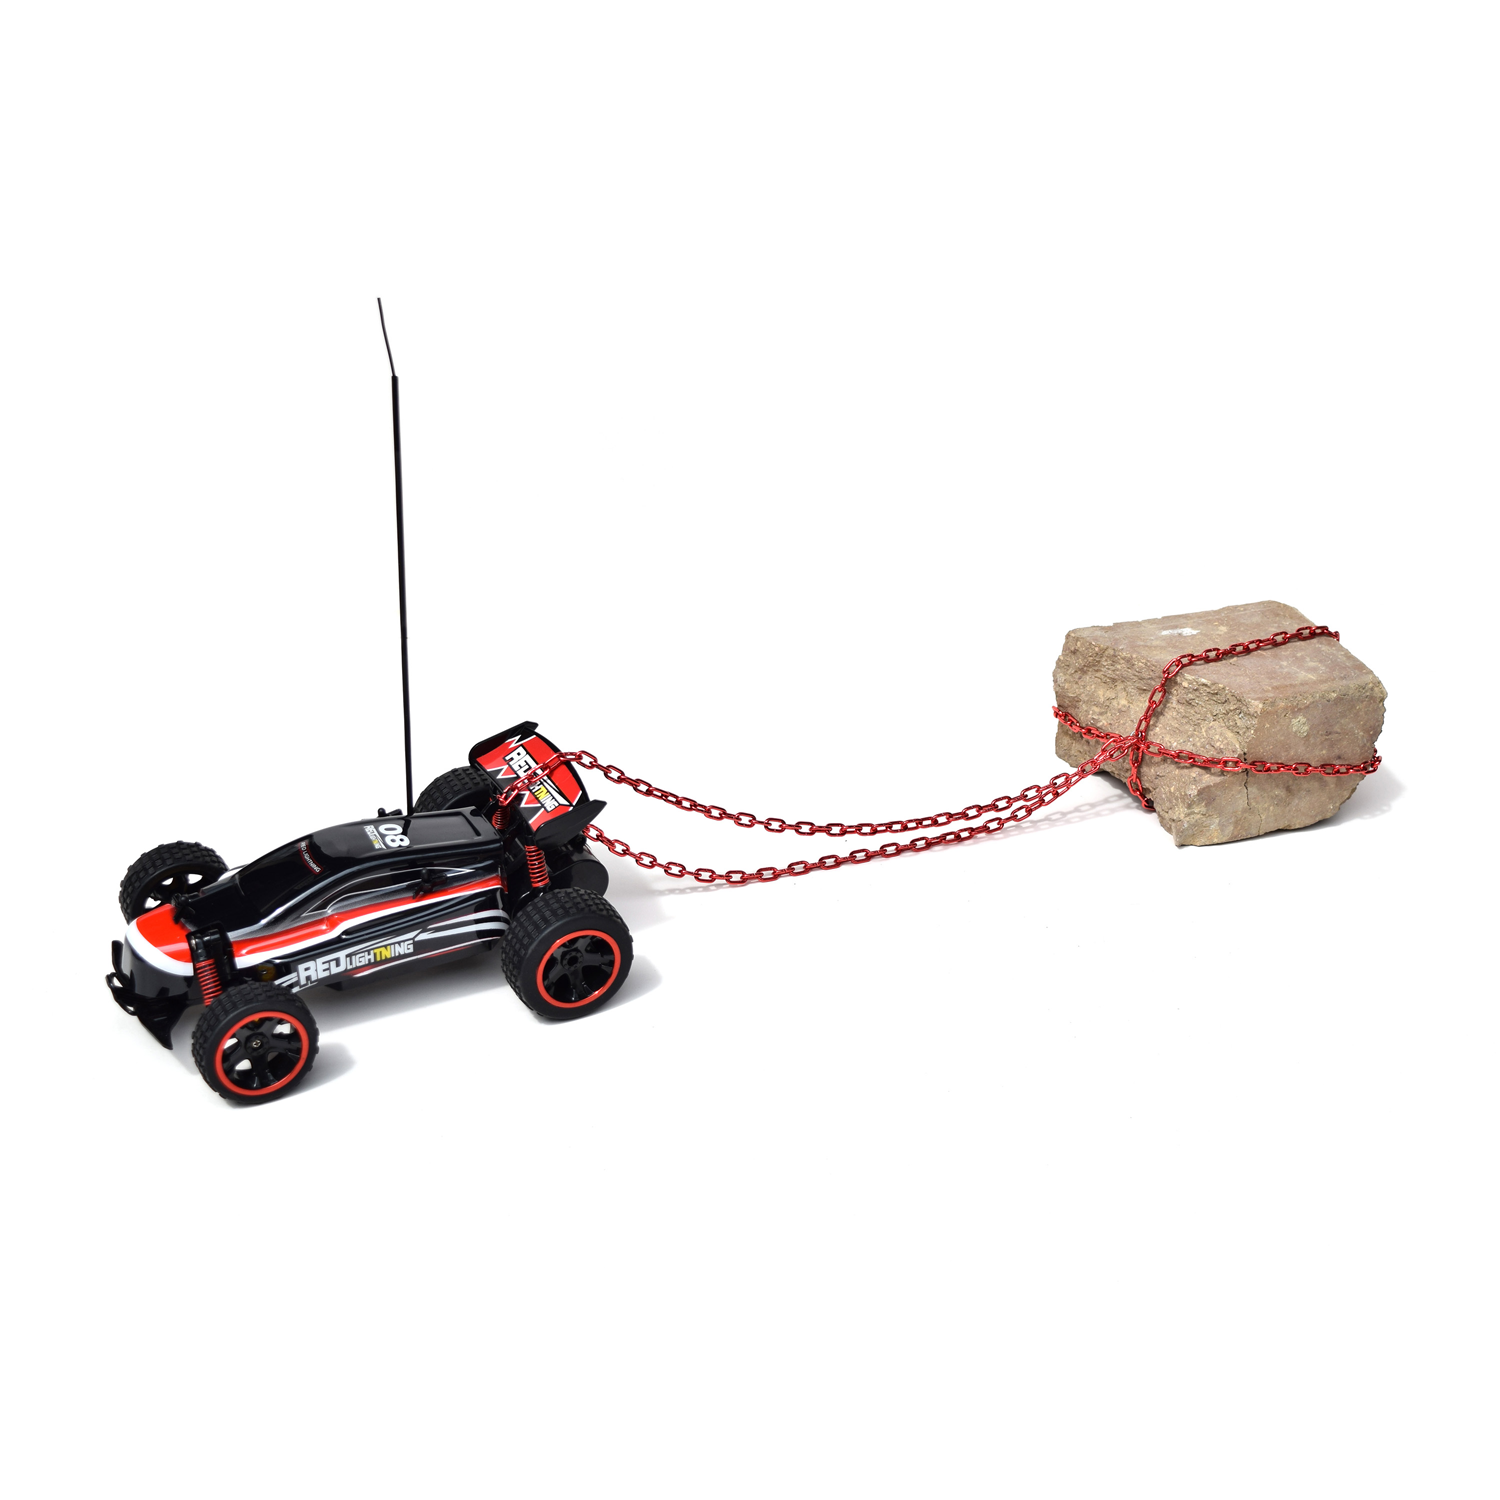 A toy race car with a brick chained to the back of it.